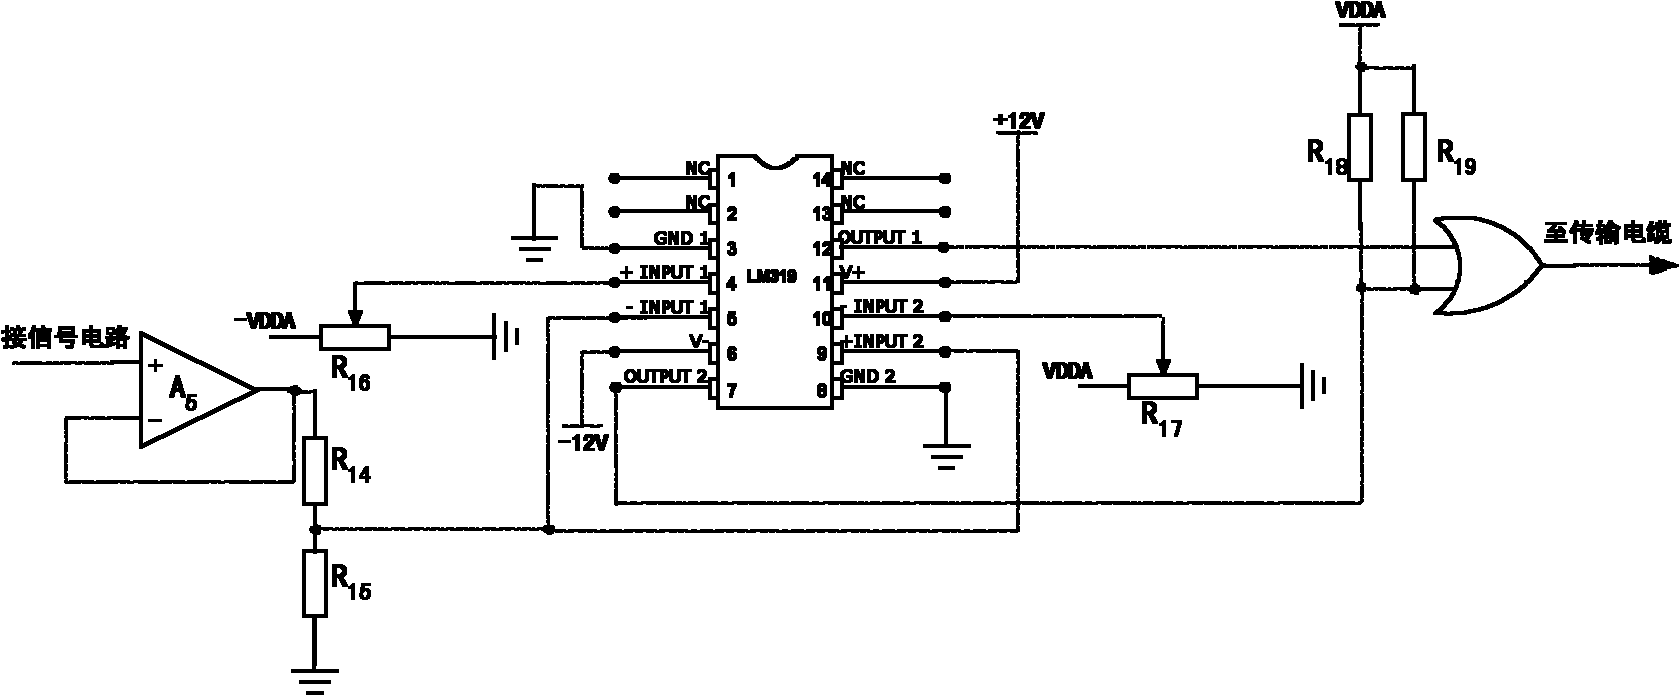 Sensor device for monitoring transient voltage of broadband integral type power grid